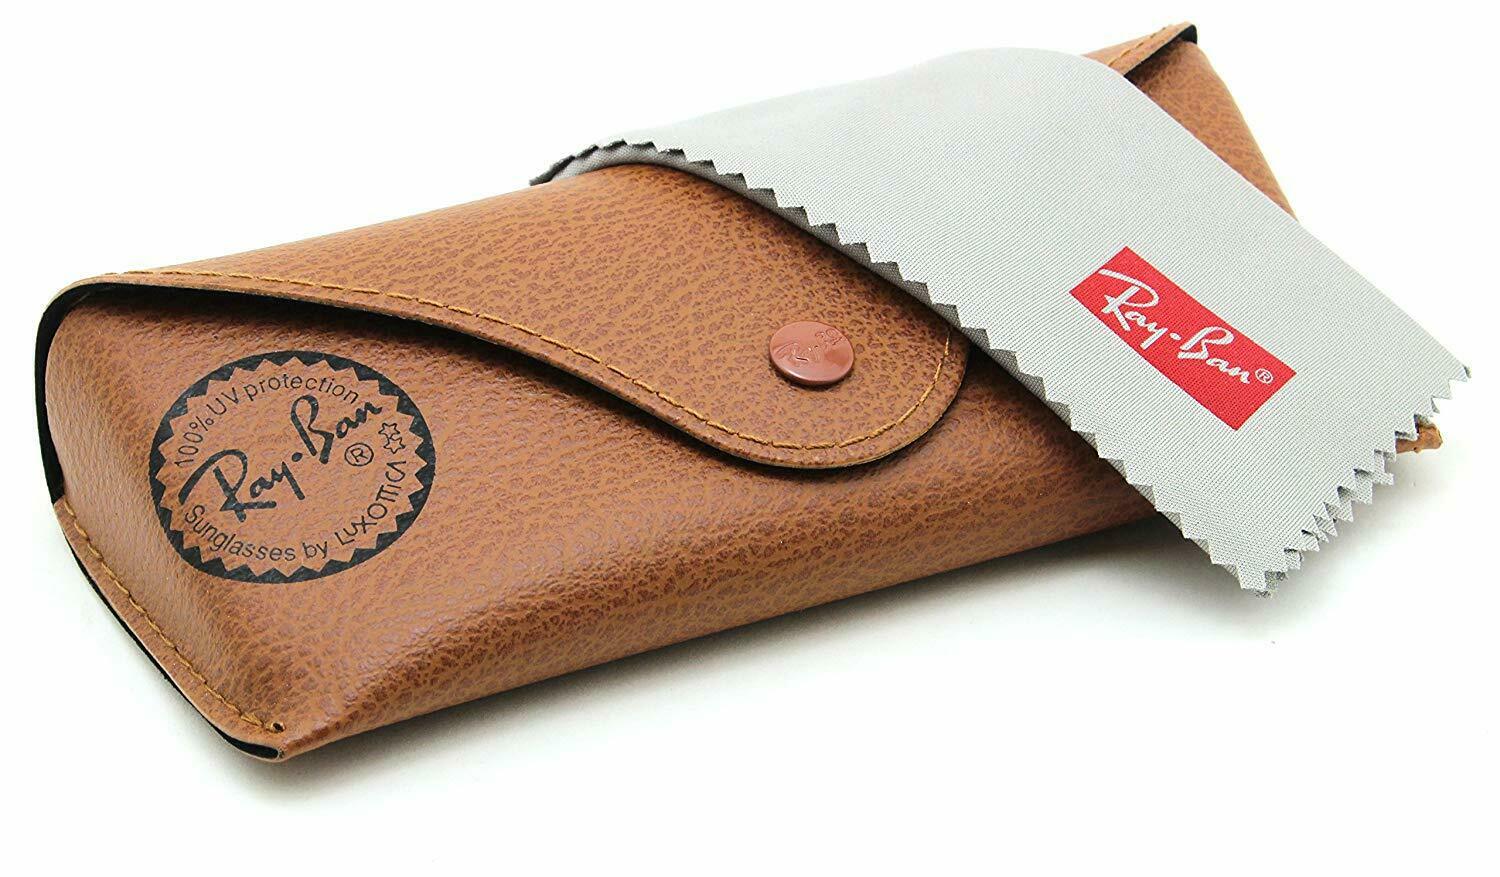 ray ban sunglasses pouch